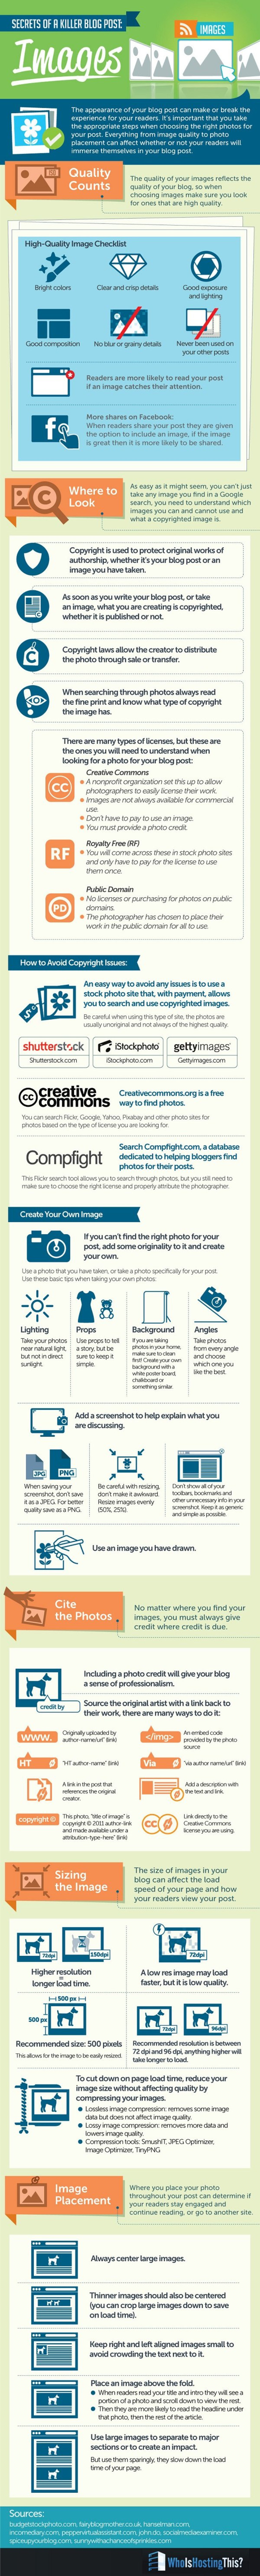 How to Choose the Right (and Legal) Images for Your Blog Post [Infographic] - Profs | The MarTech Digest | Scoop.it